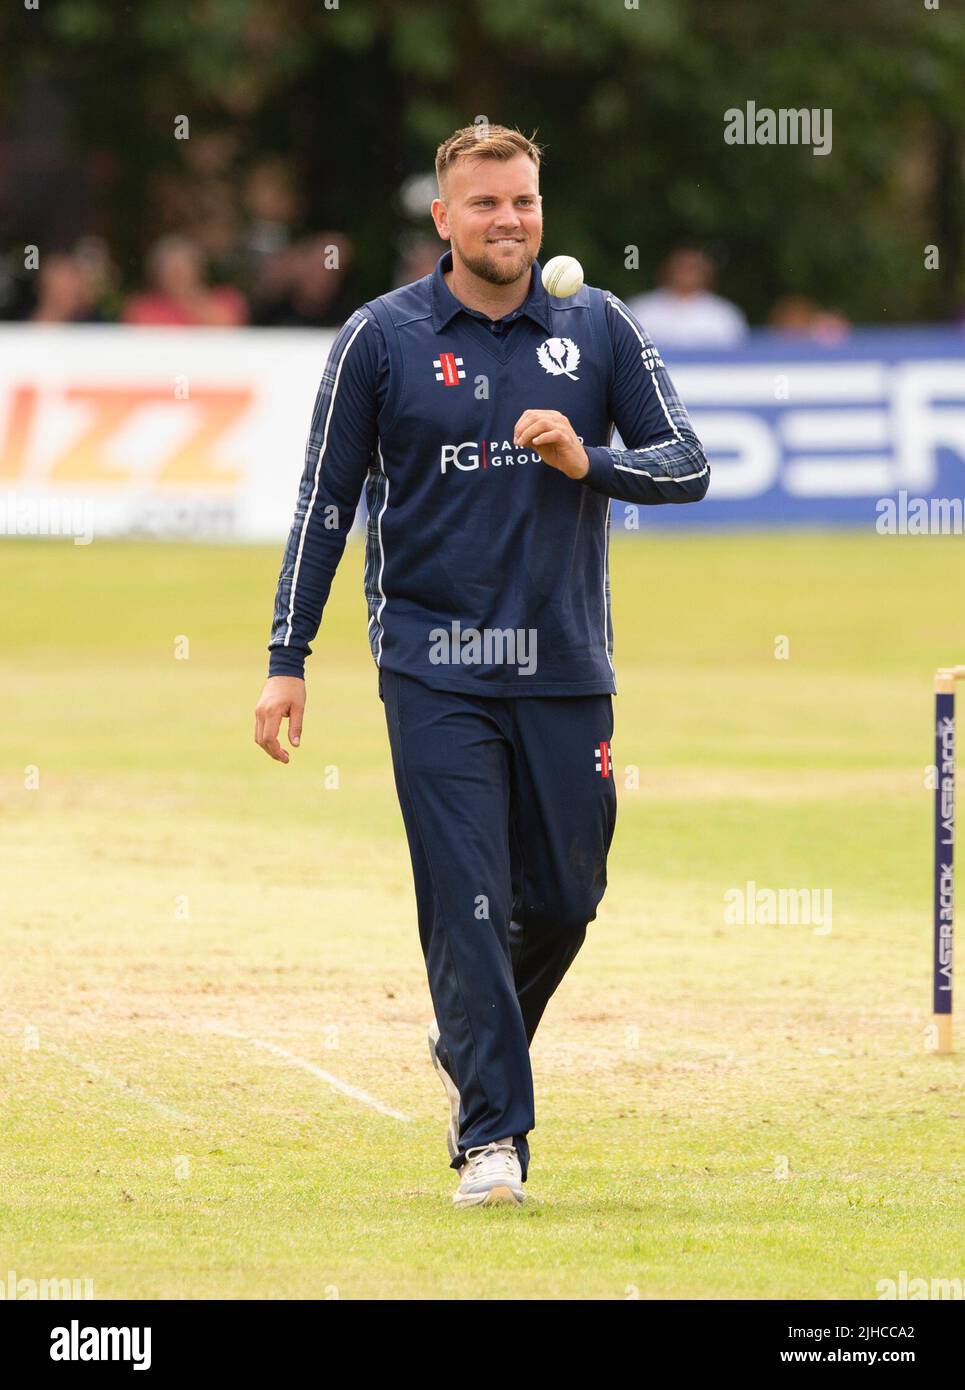 ICC Men's Cricket World Cup League 2 - Scotland v, Nepal. 17th July, 2022. Scotland take on Nepal for the second time in the ICC Div 2 Men's Cricket World Cup League 2 at Titwood, Glasgow. Pic shows: Scotland's Mark Watt. Credit: Ian Jacobs/Alamy Live News Stock Photo